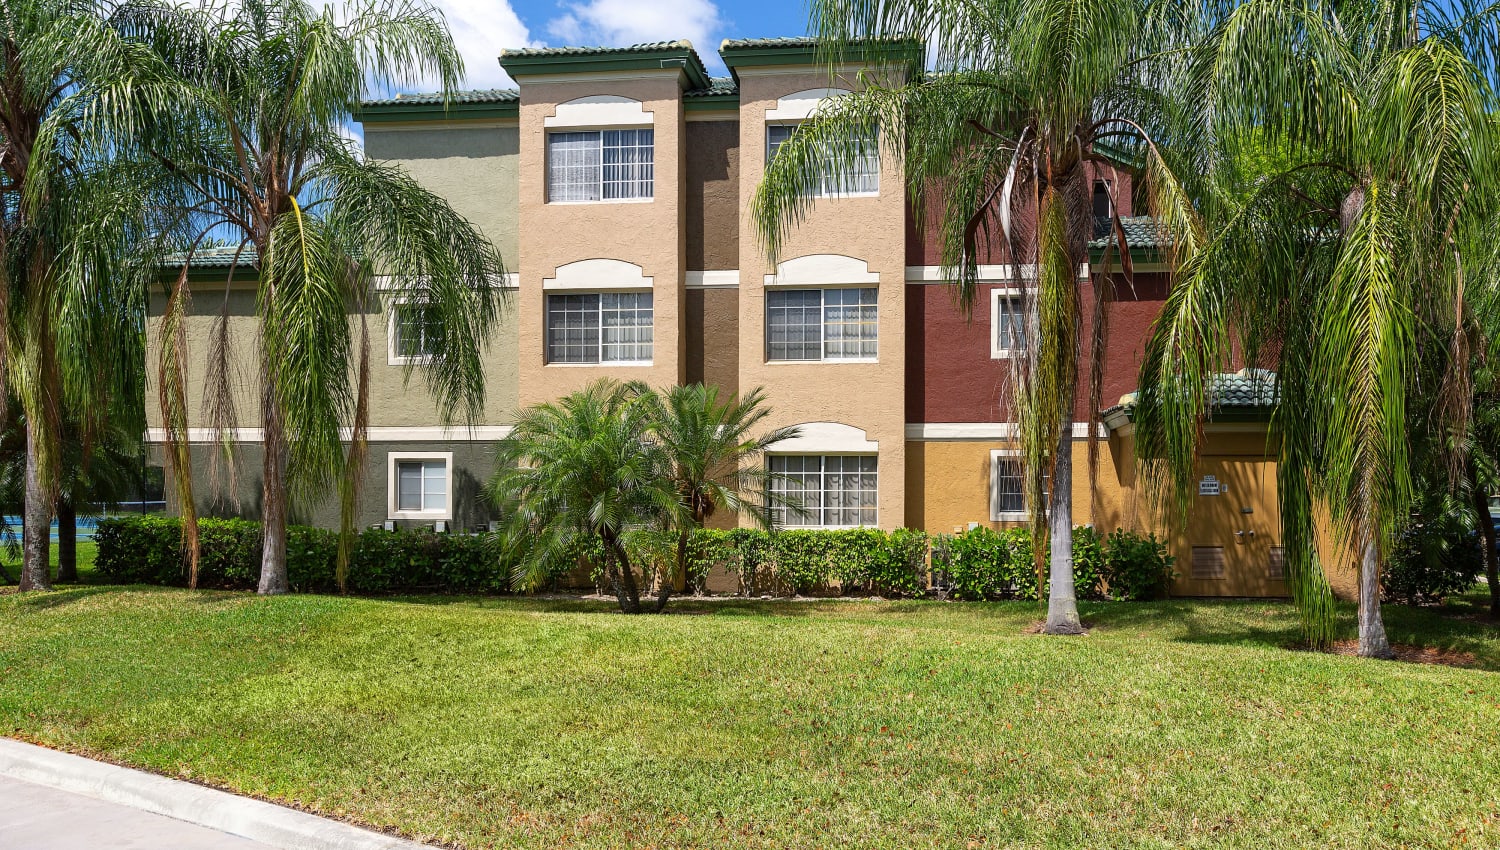 Exterior of Club Lake Pointe Apartments in Coral Springs, Florida